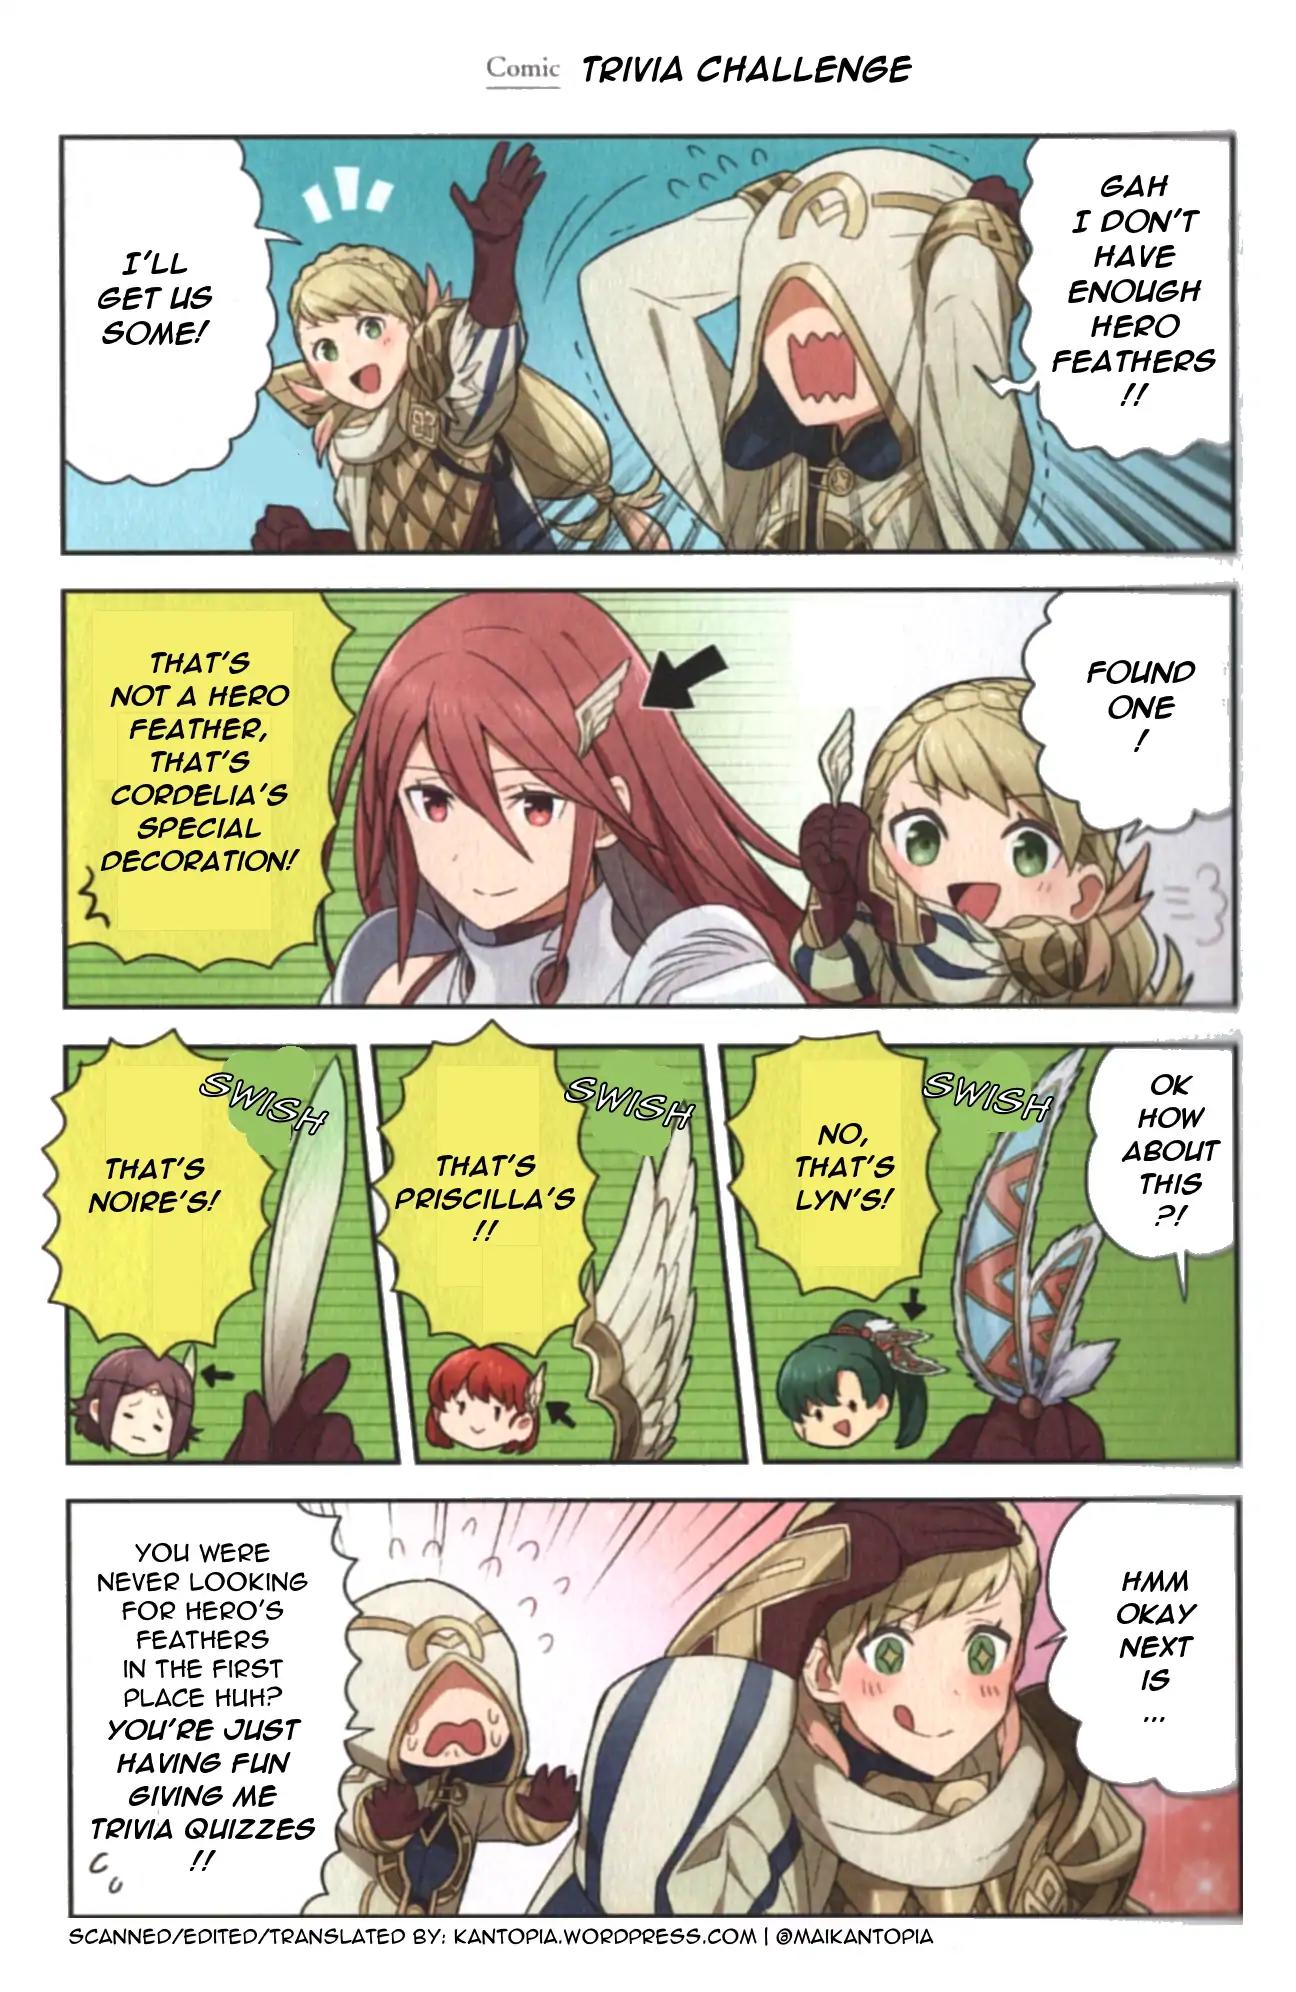 Fire Emblem Heroes Daily Lives of the Heroes Vol.1 Chapter 0.03: Character comic: